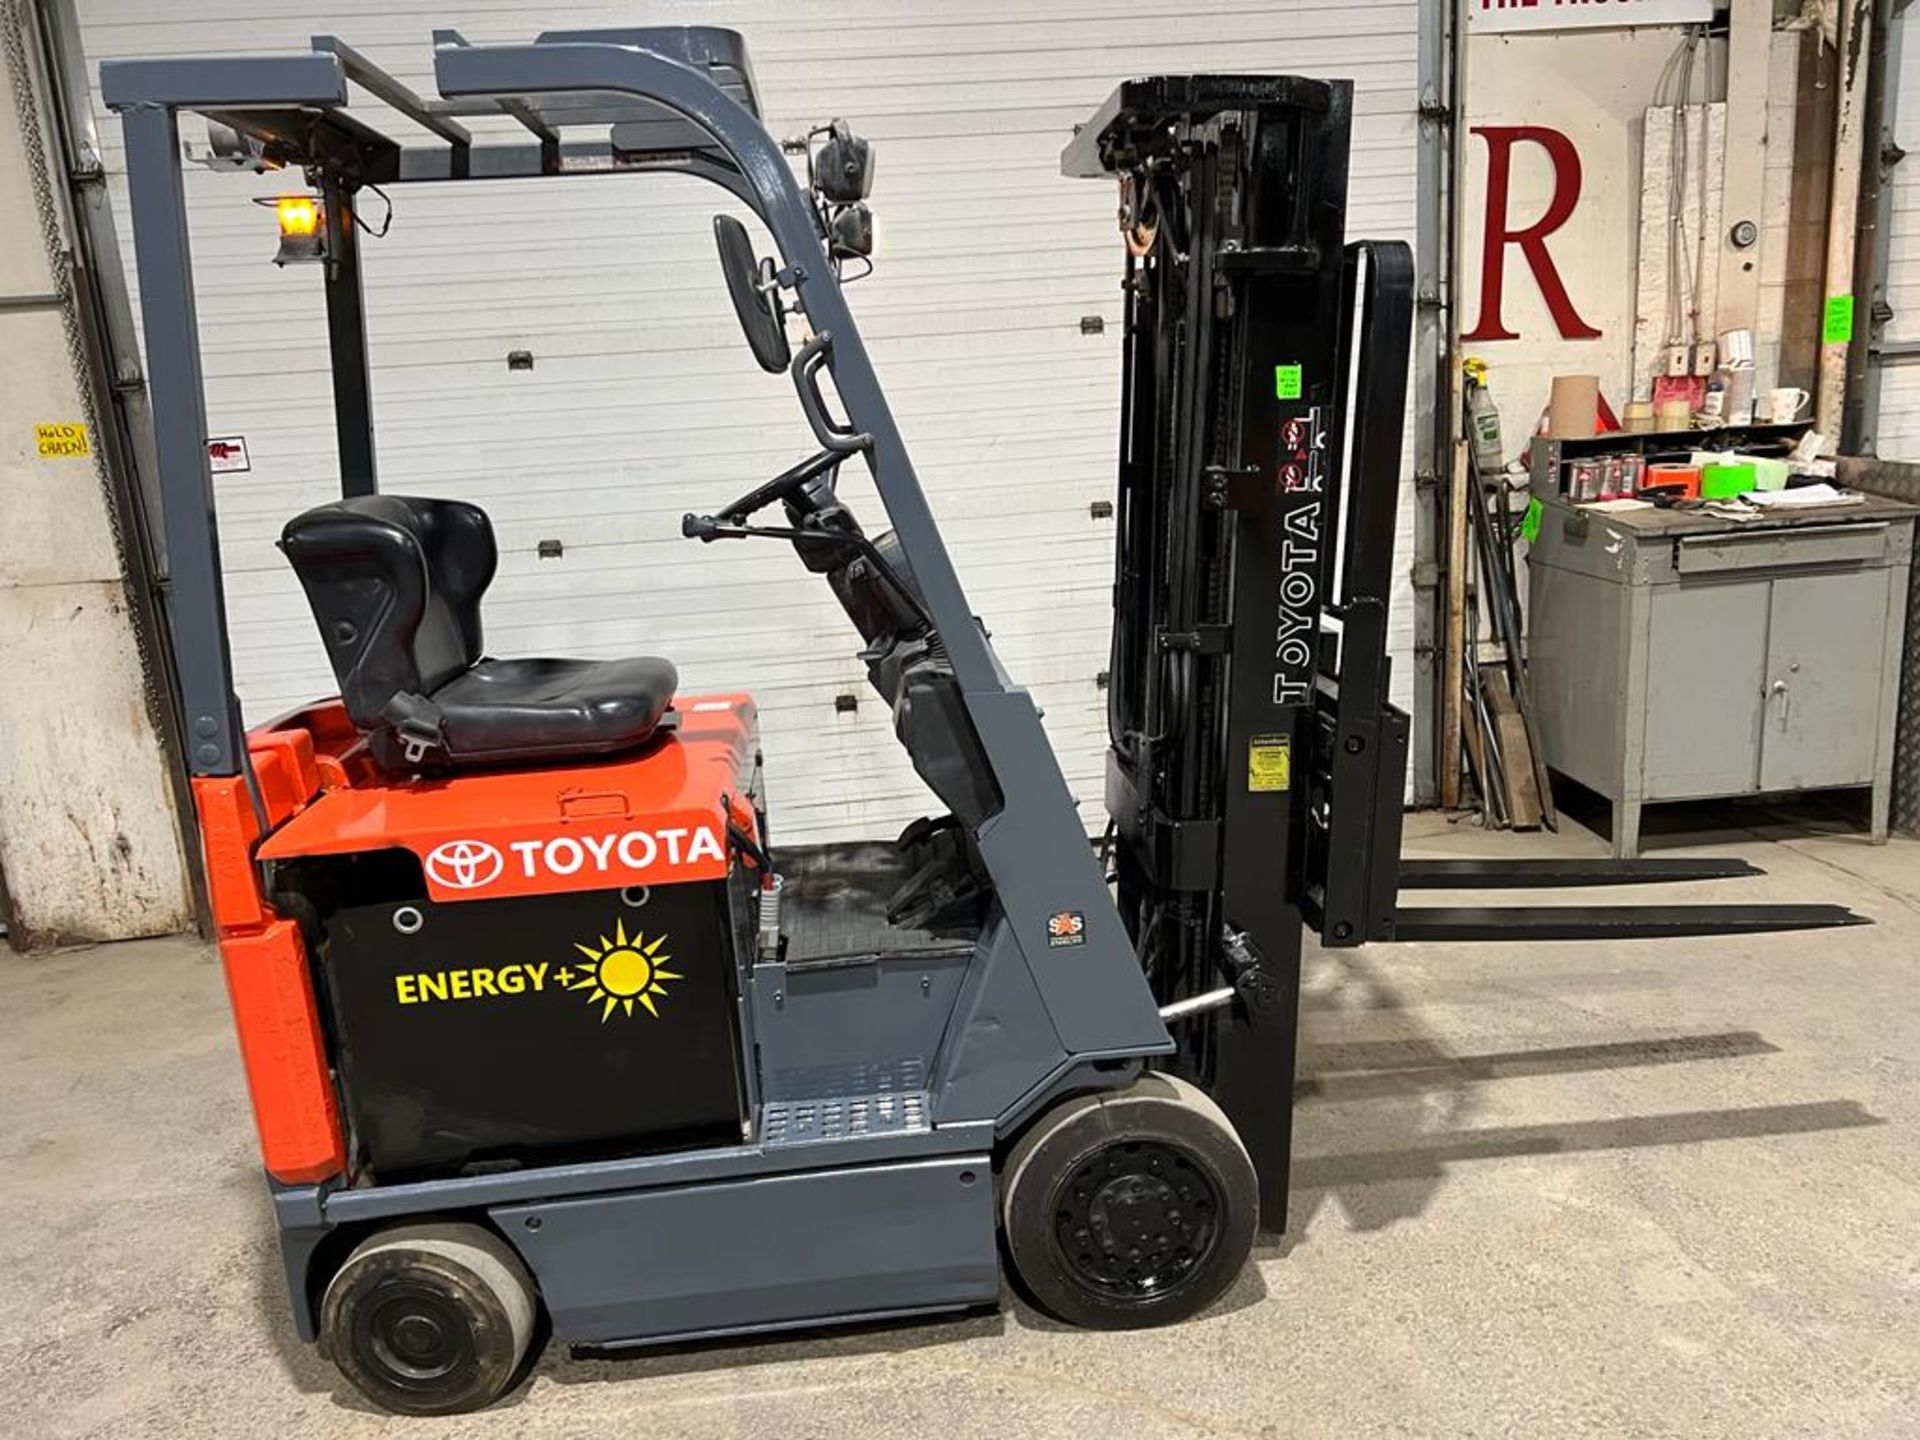 NICE Toyota 3,600lbs Capacity Forklift NEW 36V Battery with sideshift & 3-stage mast - FREE CUSTOMS